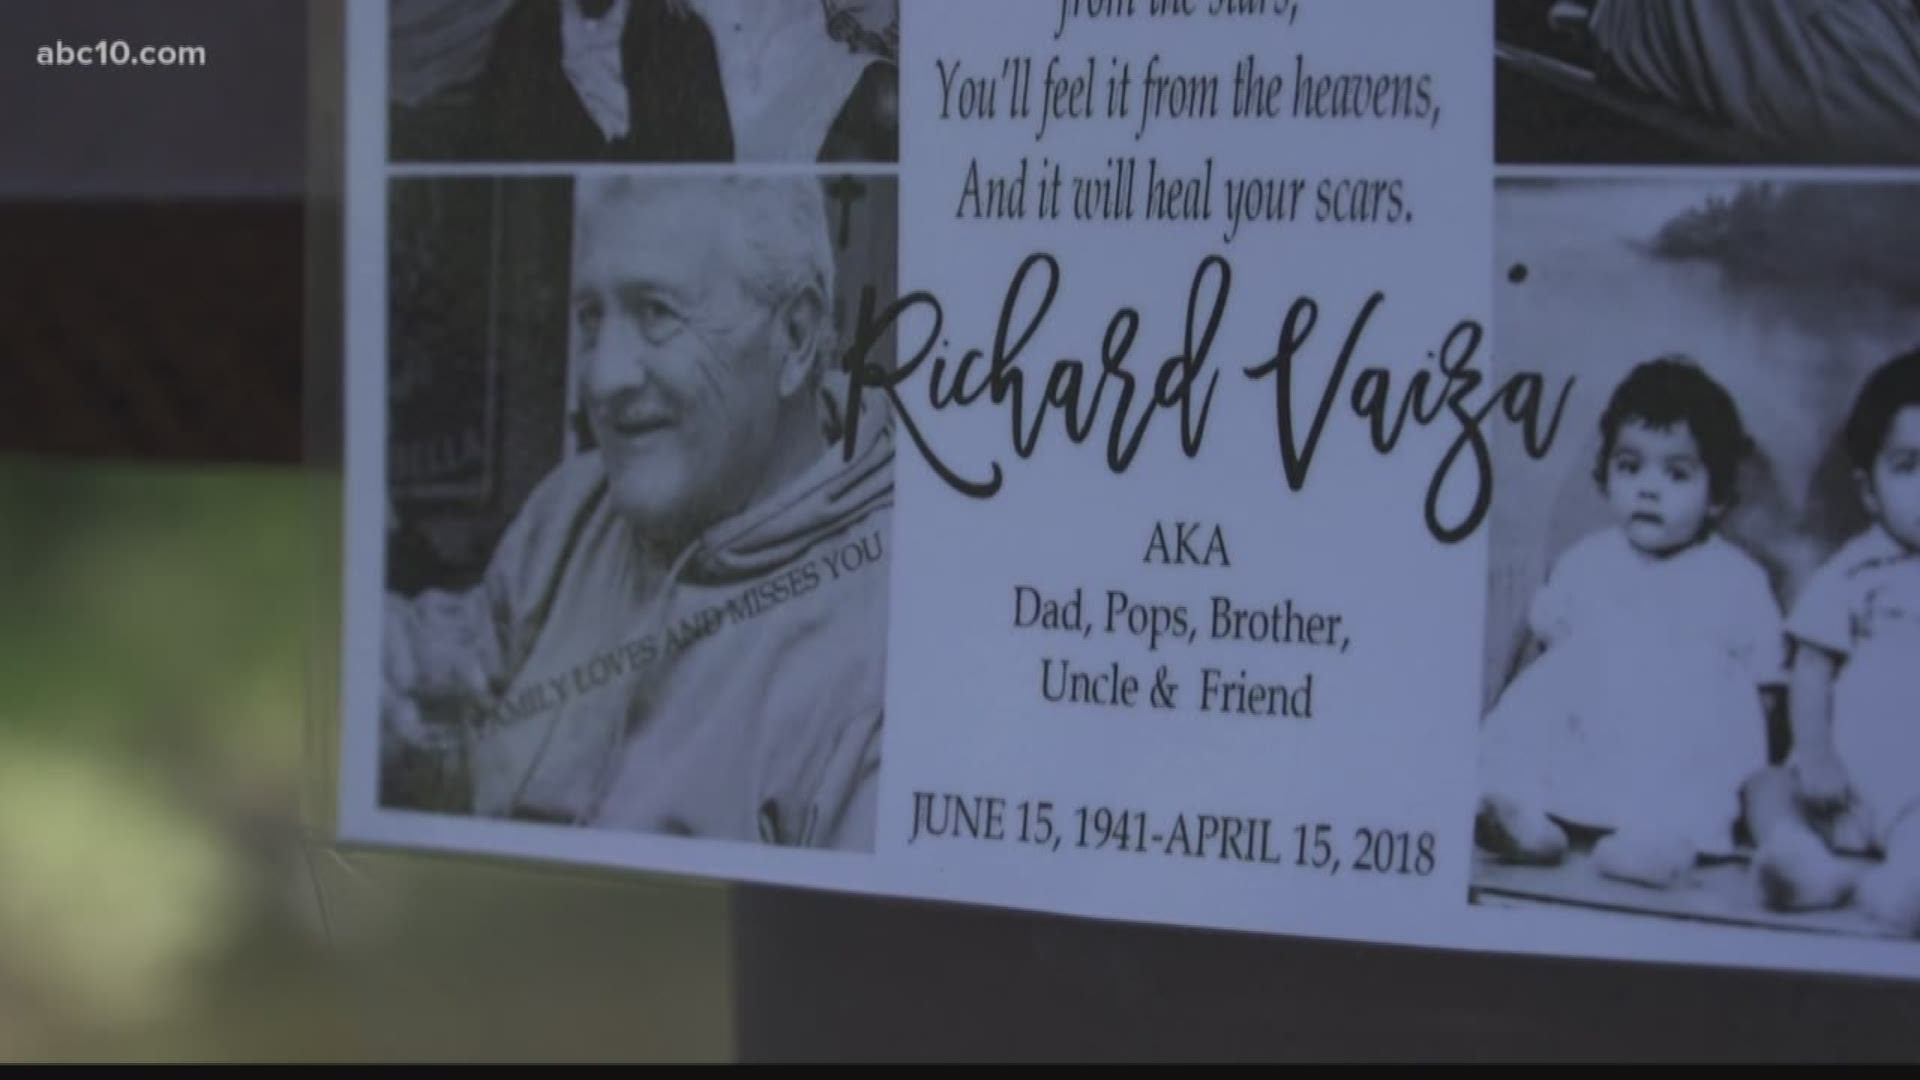 Family seeks answers after elderly man found dead in Rio Linda (April 20, 2018)